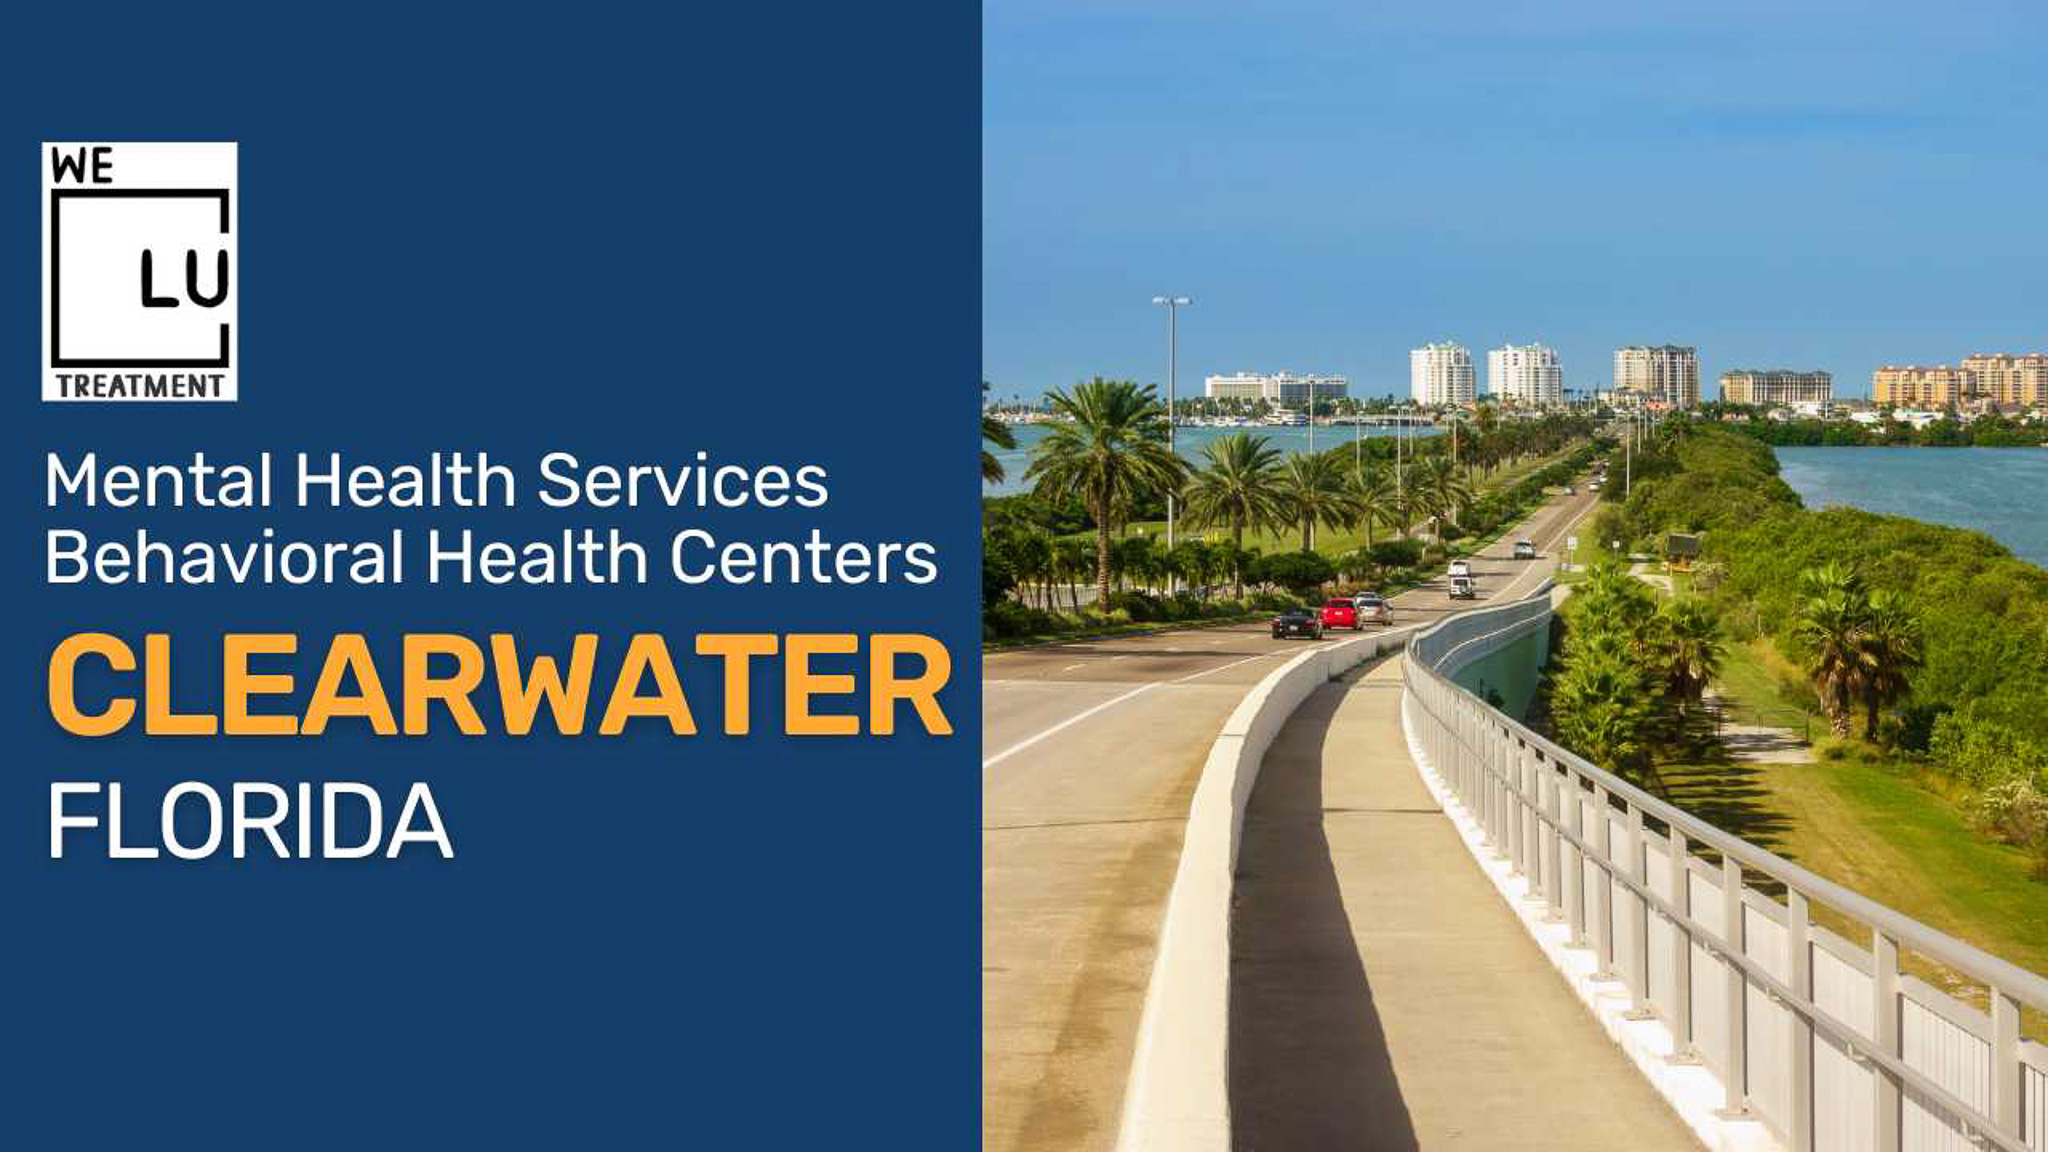 Clearwater FL (MH) We Level Up treatment center for drug and alcohol rehab detox and mental health services - Image 1